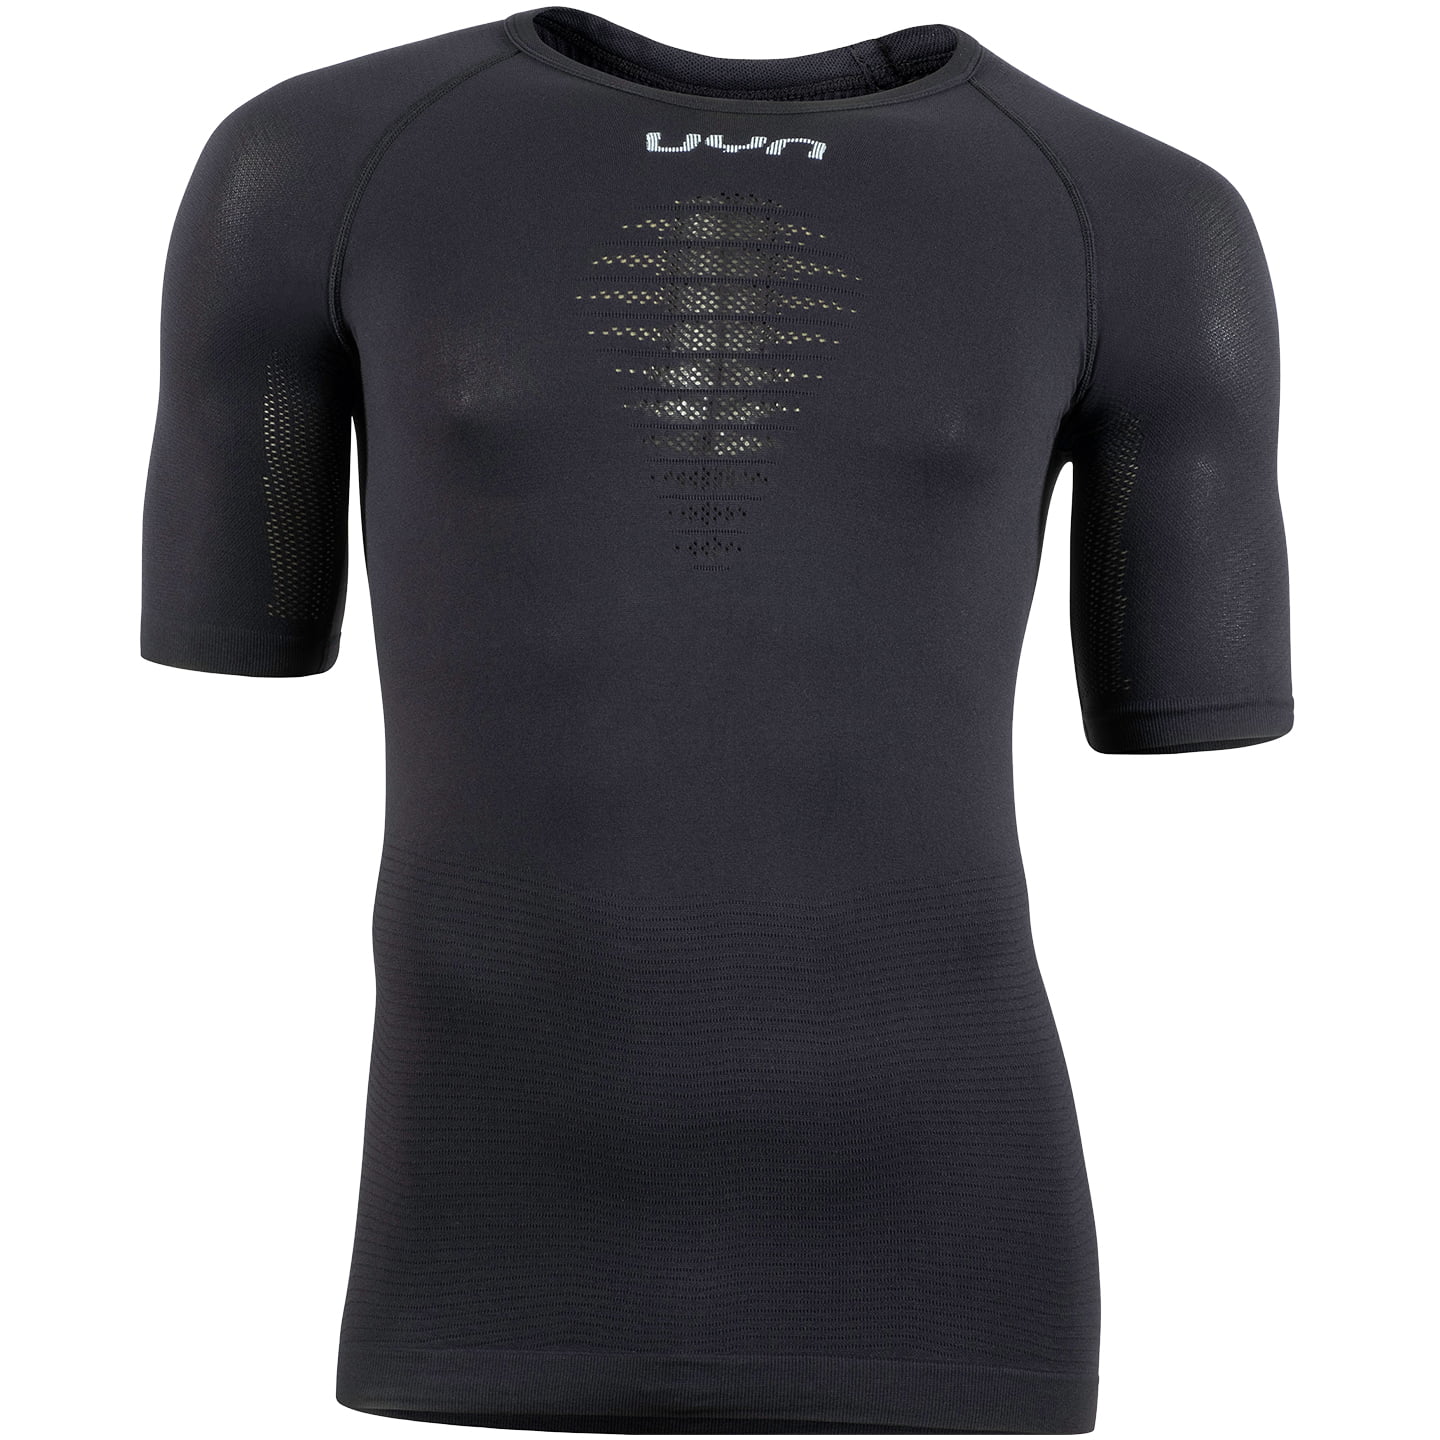 UYN Energyon Cycling Base Layer Base Layer, for men, size S-M, Undershirt, Cycle wear